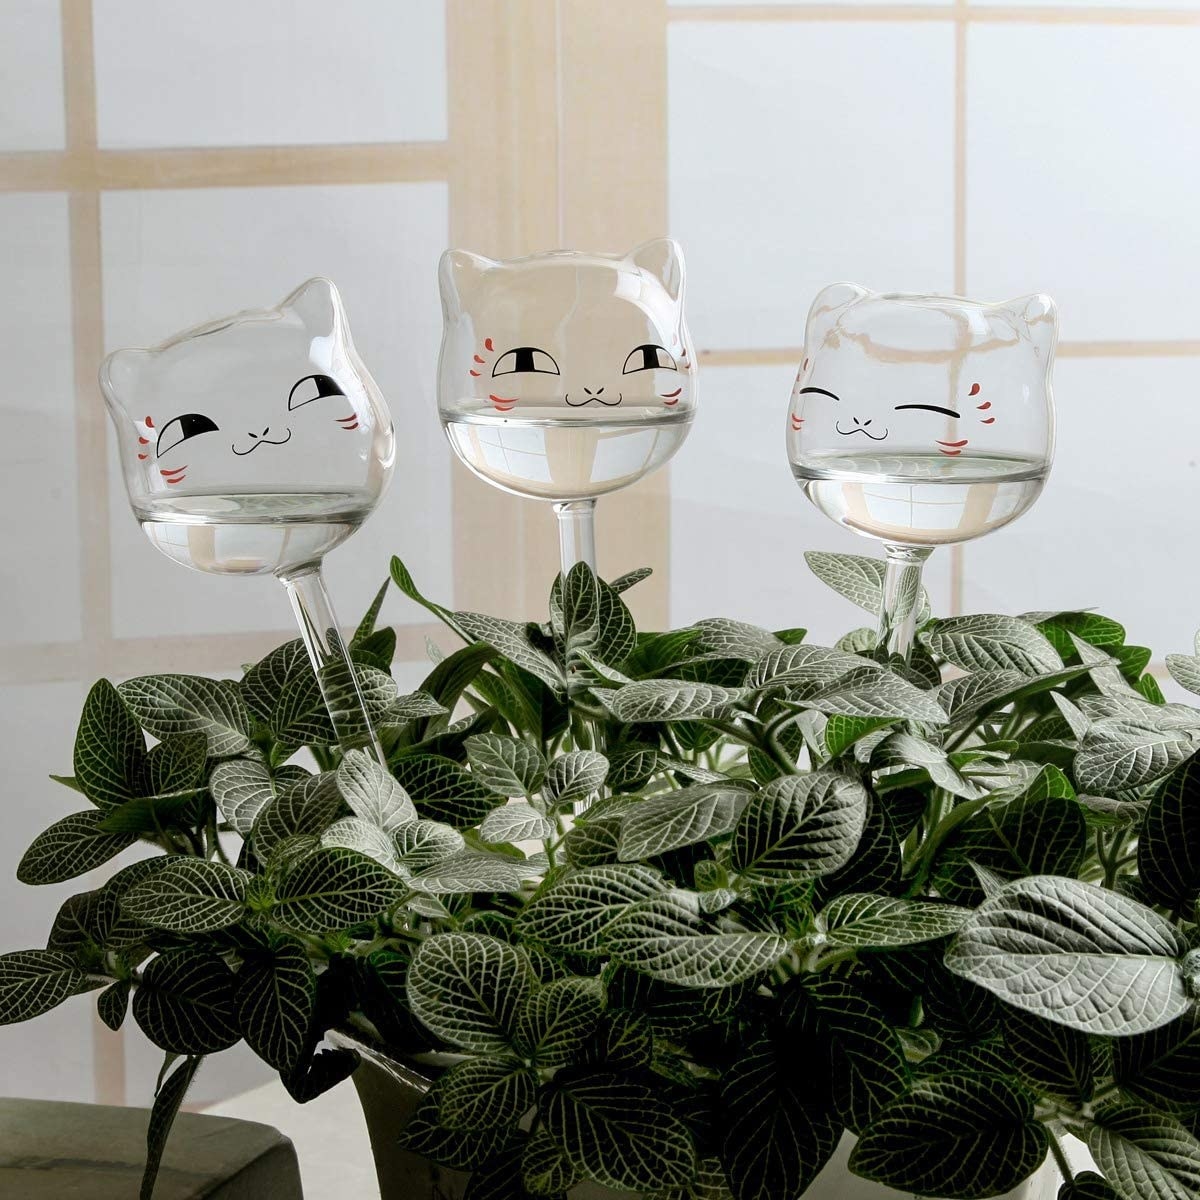 Three self-watering globes in a plant